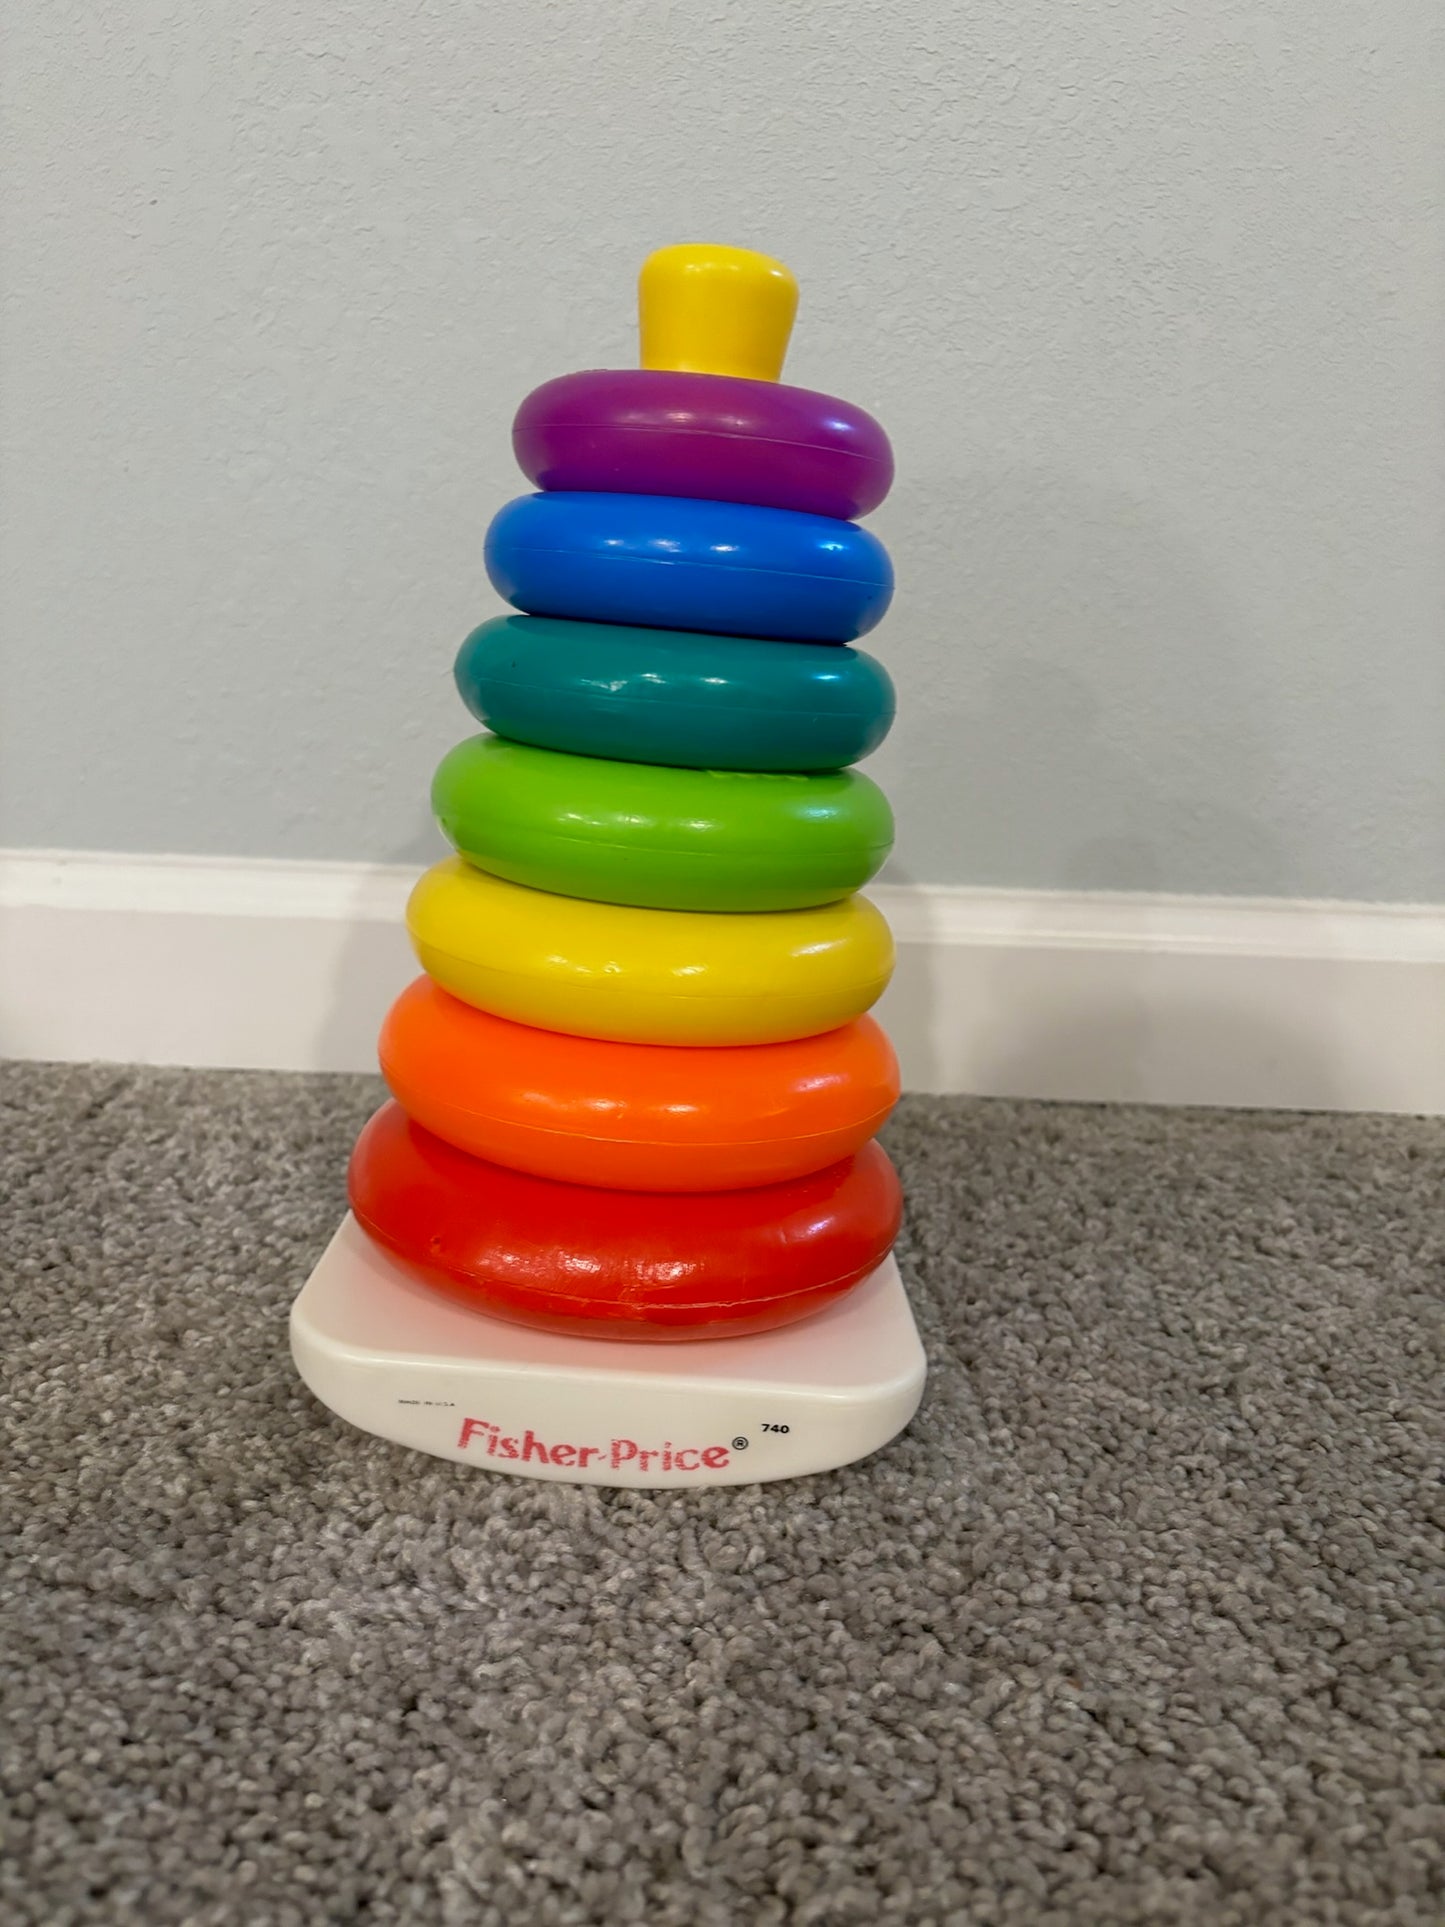 Fisher Price rainbow stacking toy